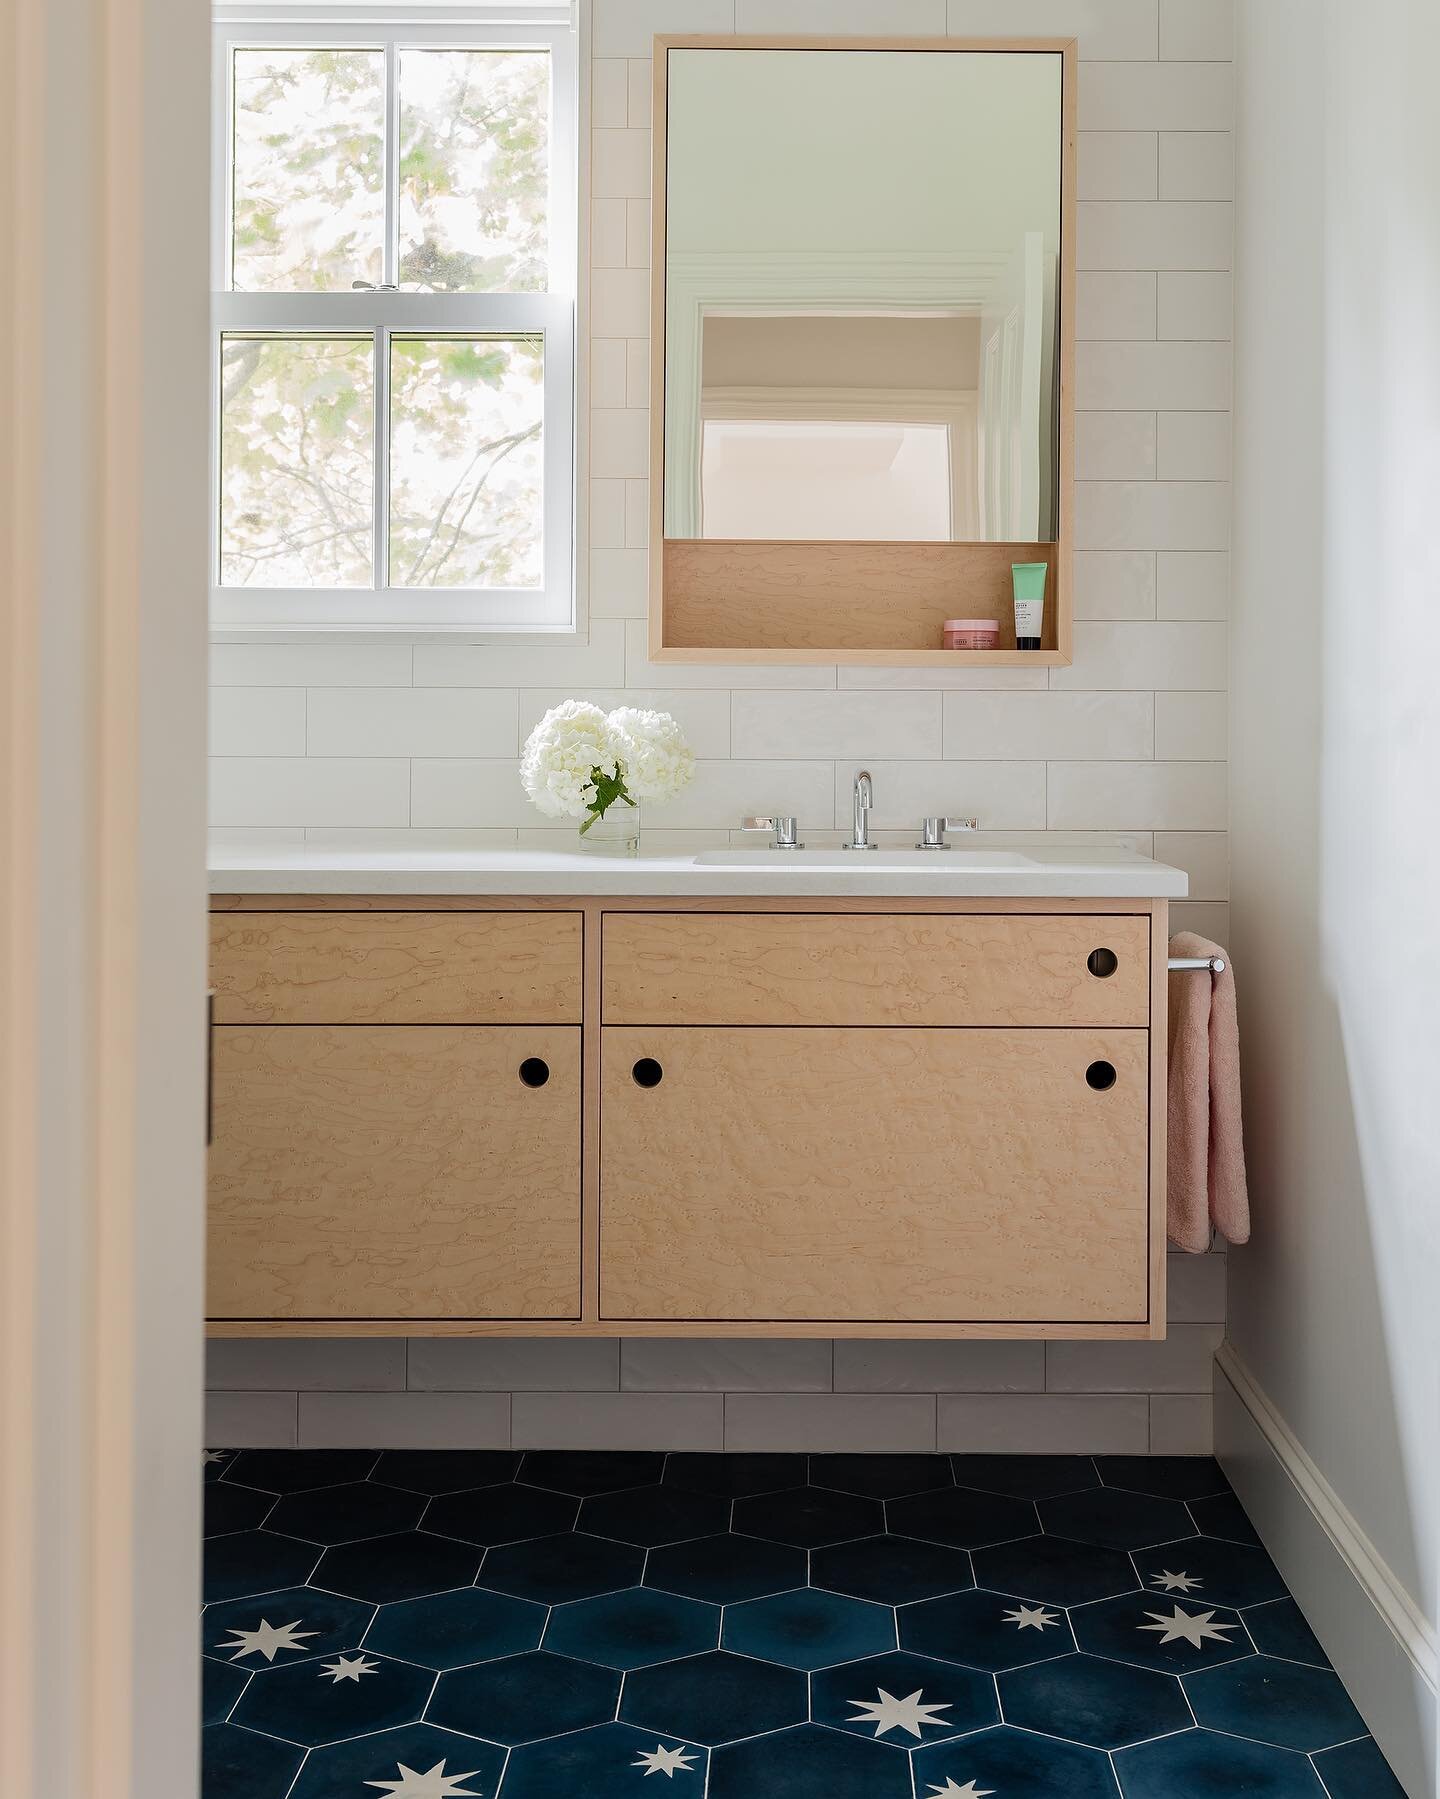 We love this kids bath at our Newton Modern Addition project featuring a custom birdseye maple vanity and constellation inspired concrete floor tile! ✨

Photography: @michaeljleephotography 
Builder: @auburndalebuilders 
Cabinetry: @schiefer_woodwork